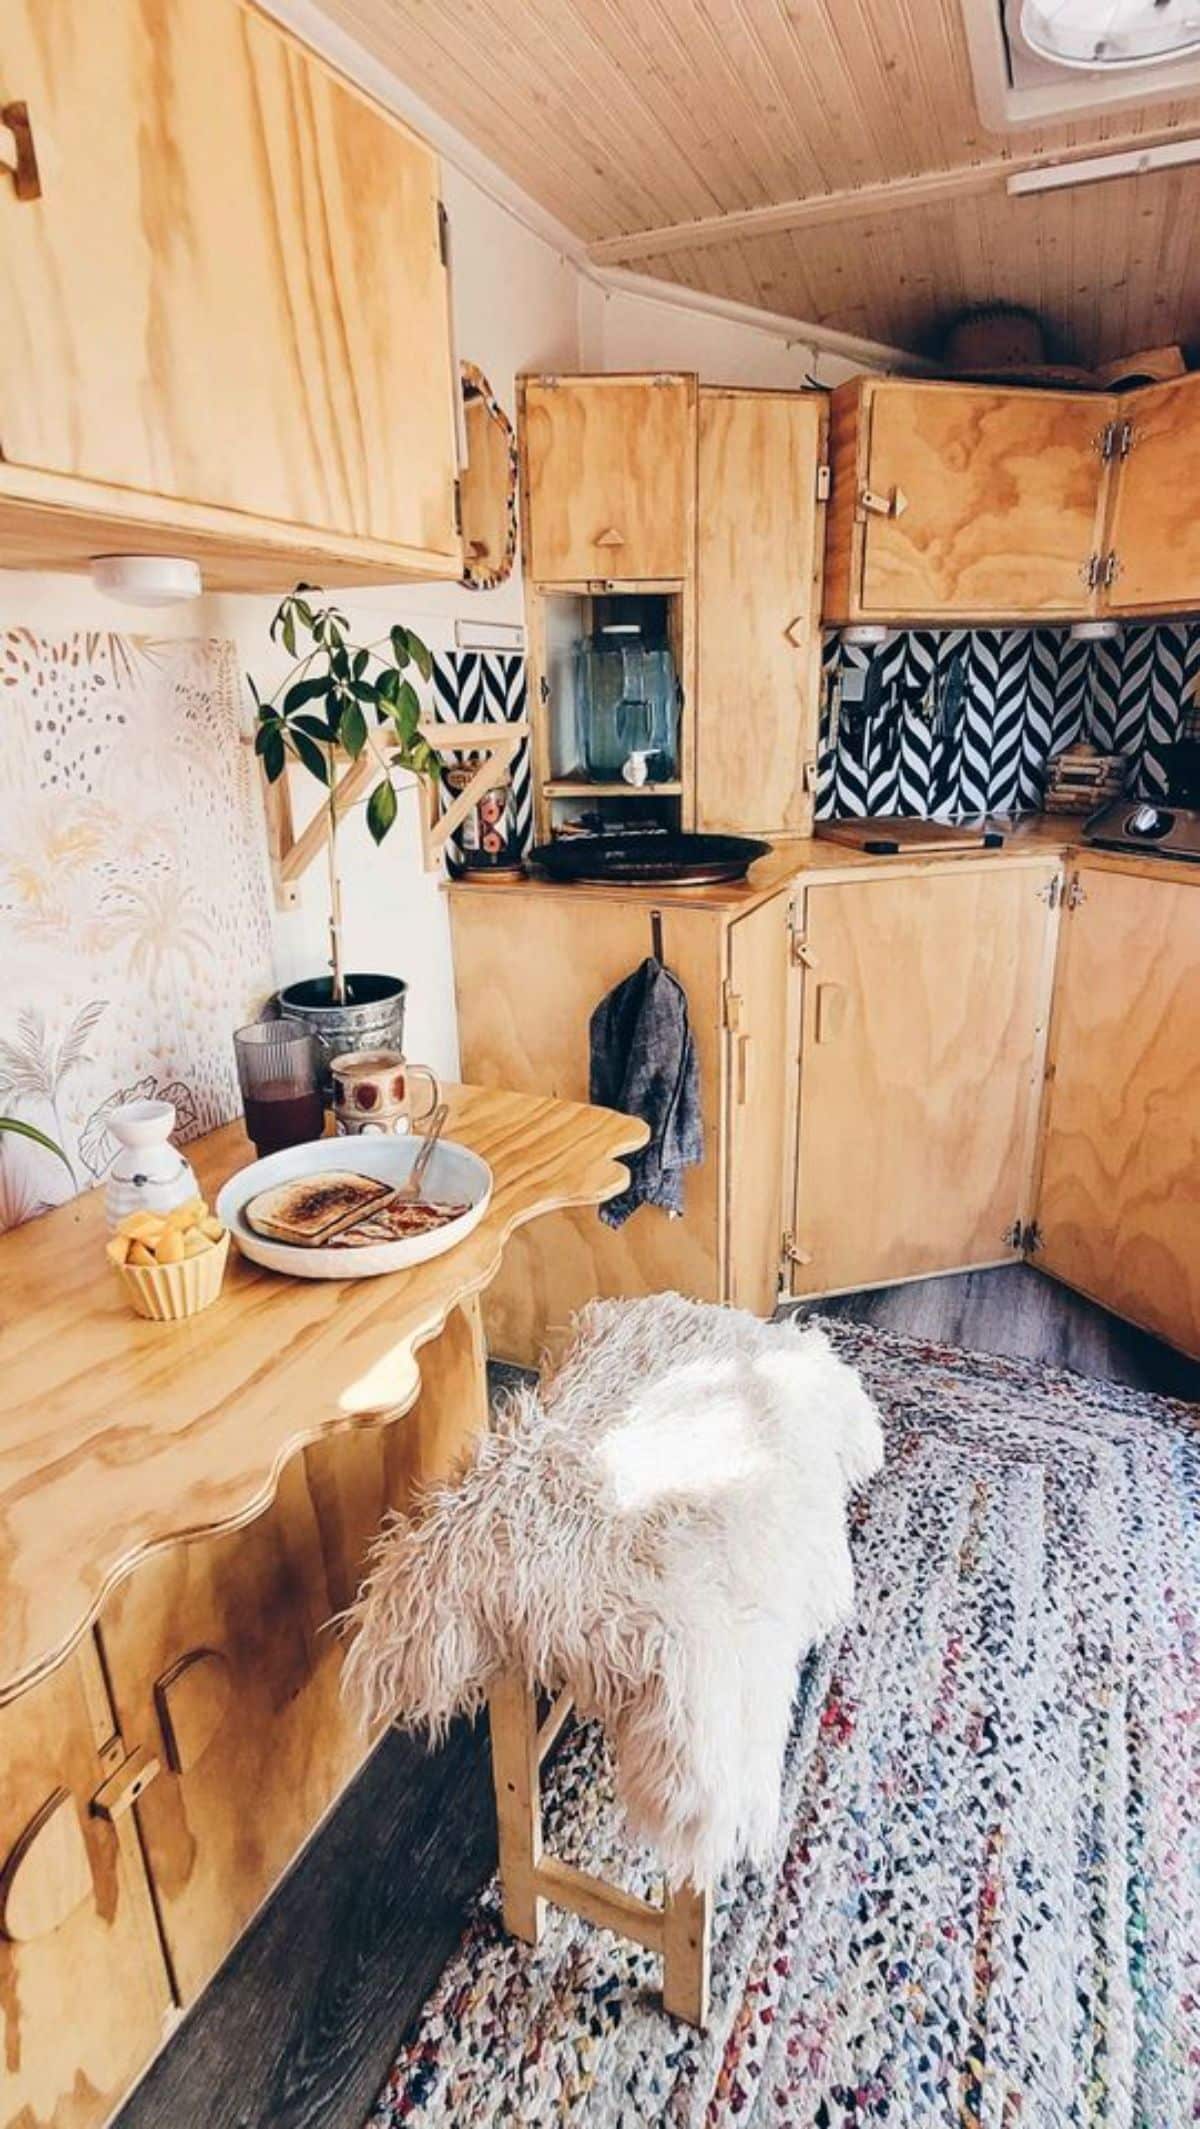 Wooden dinning area and sitting area opposite to the kitchen of 14’ Tiny Camper makes it amazing